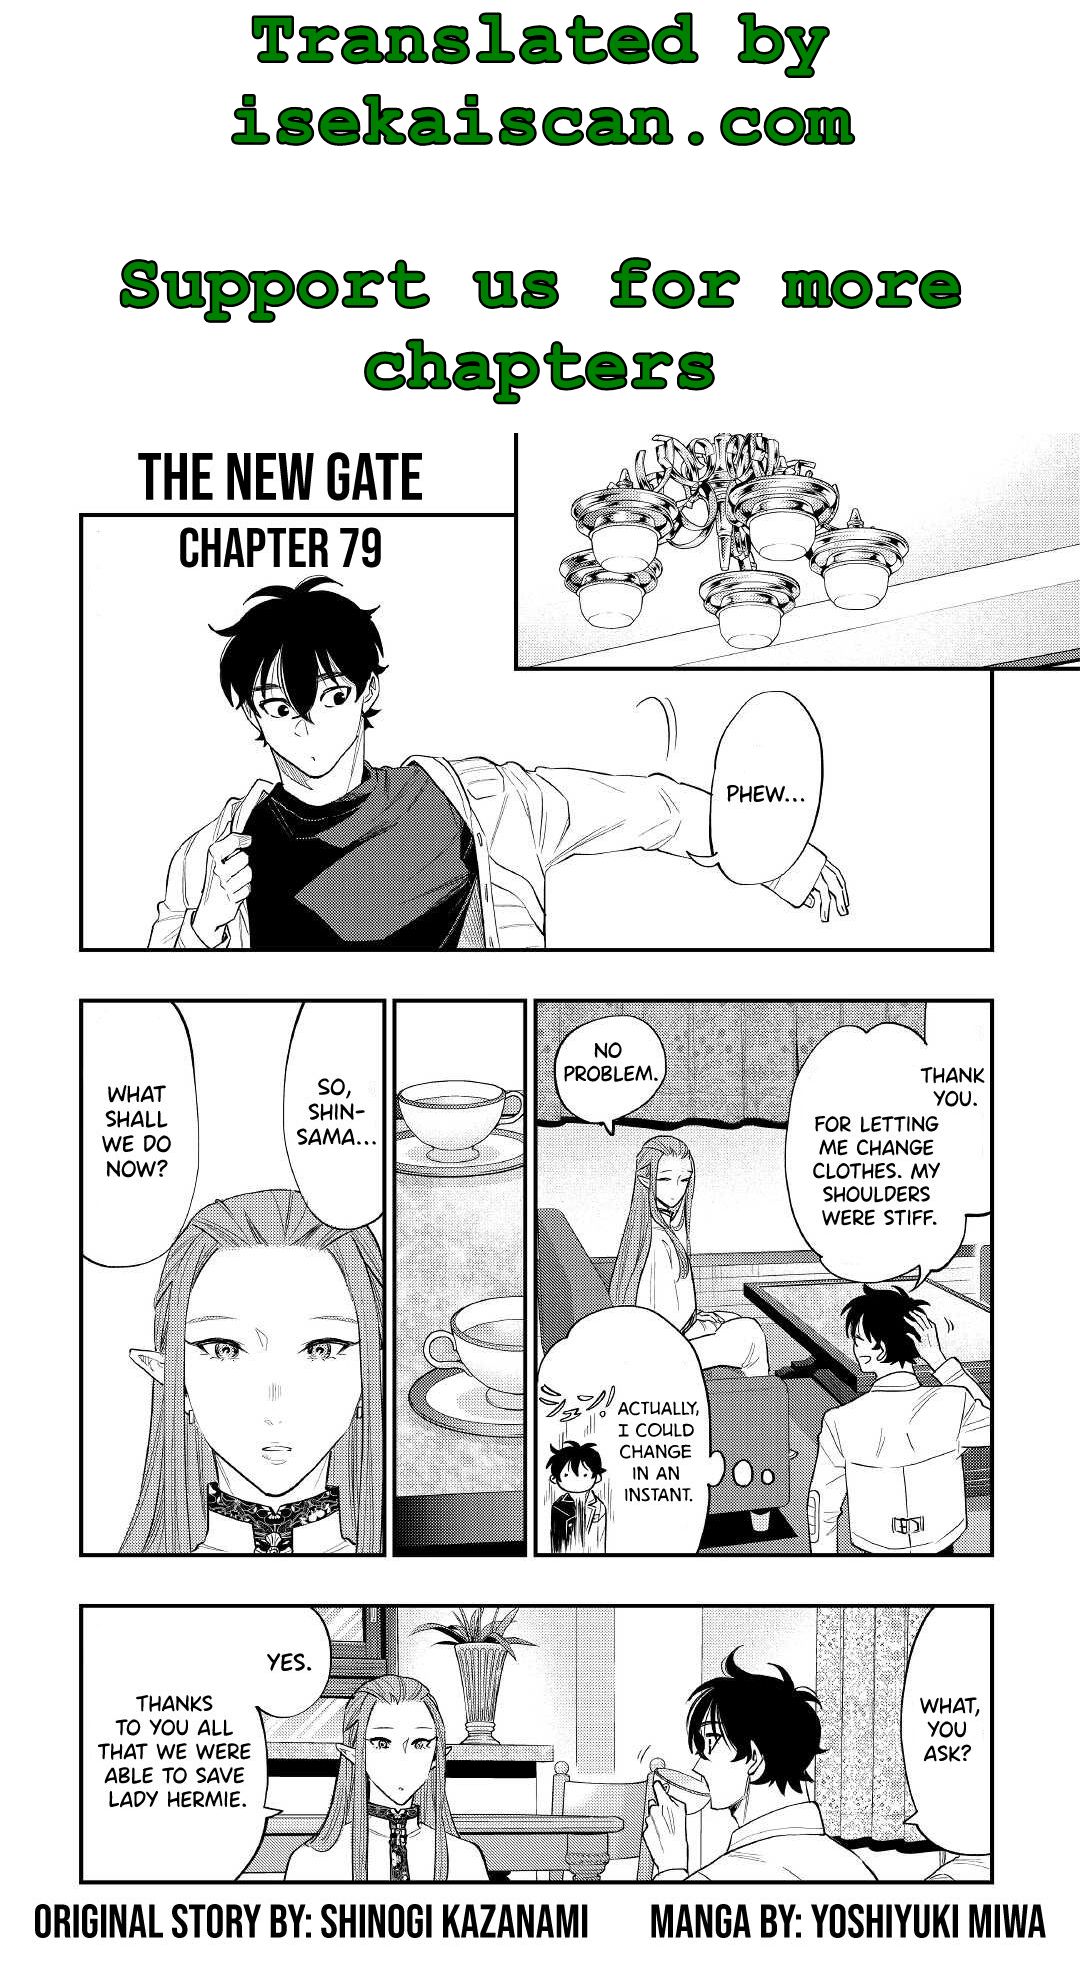 The New Gate Chapter 79 #1